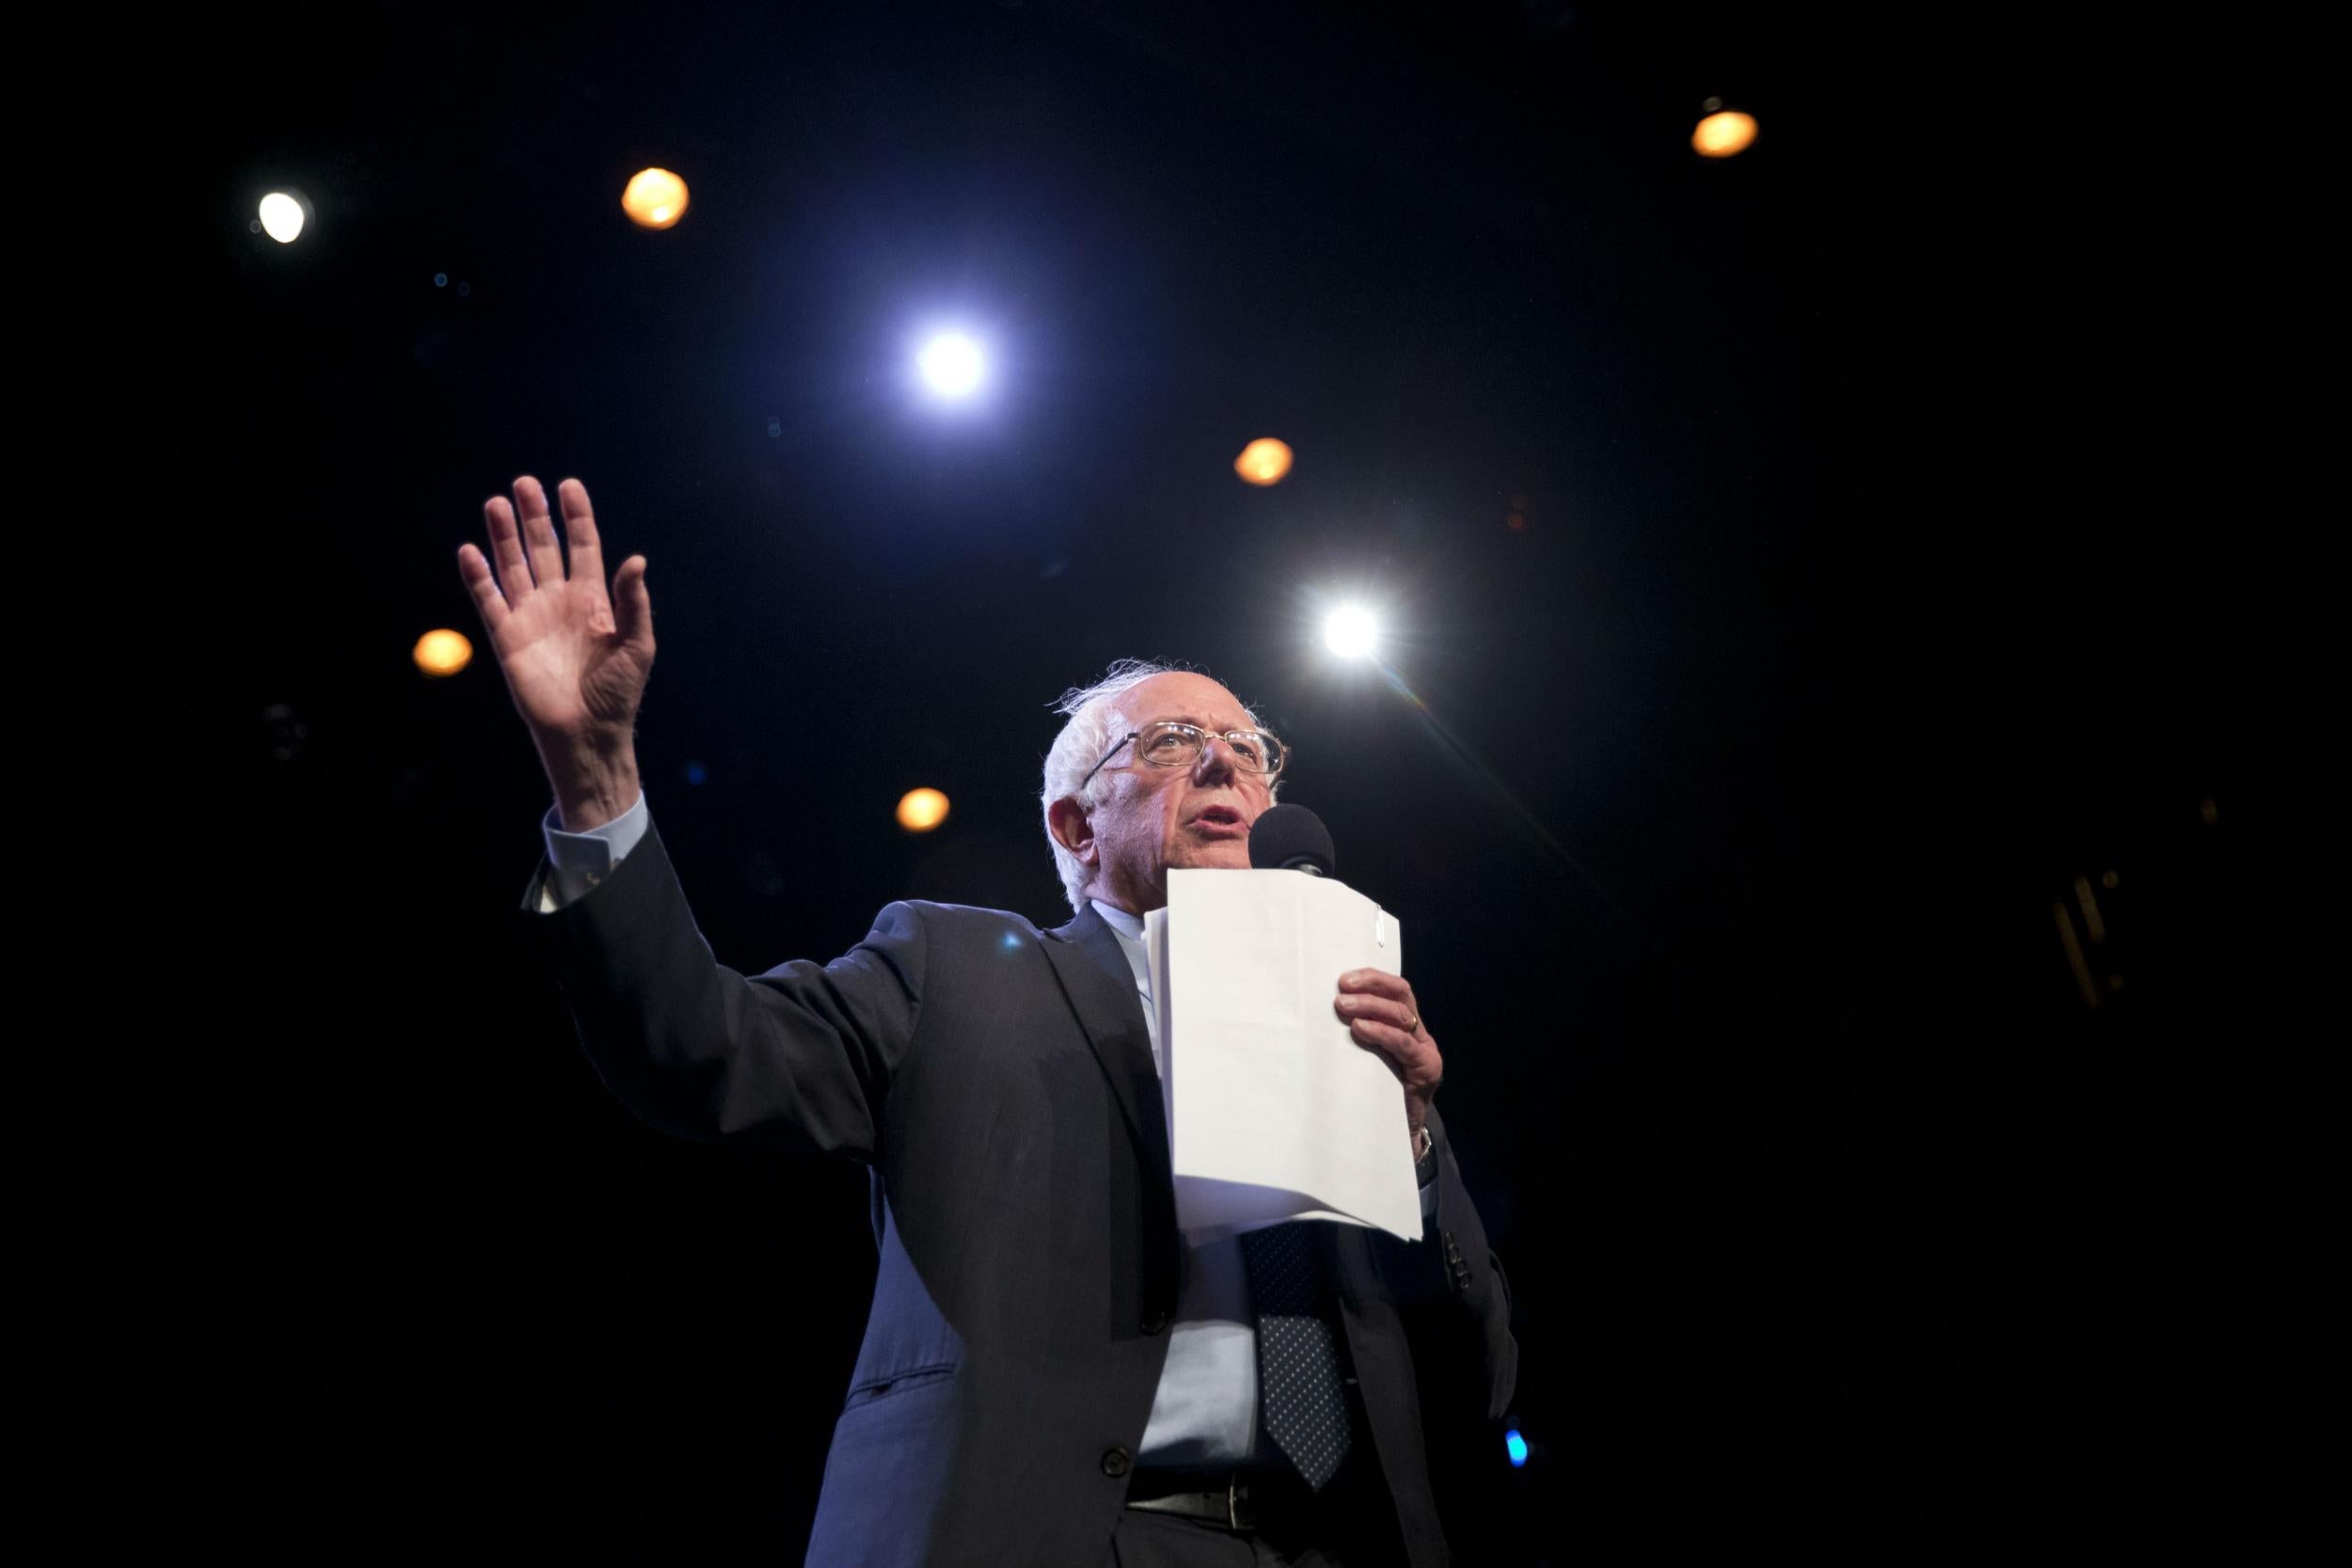 Mr Sanders was speaking during a rally at the Apollo Theatre in New York